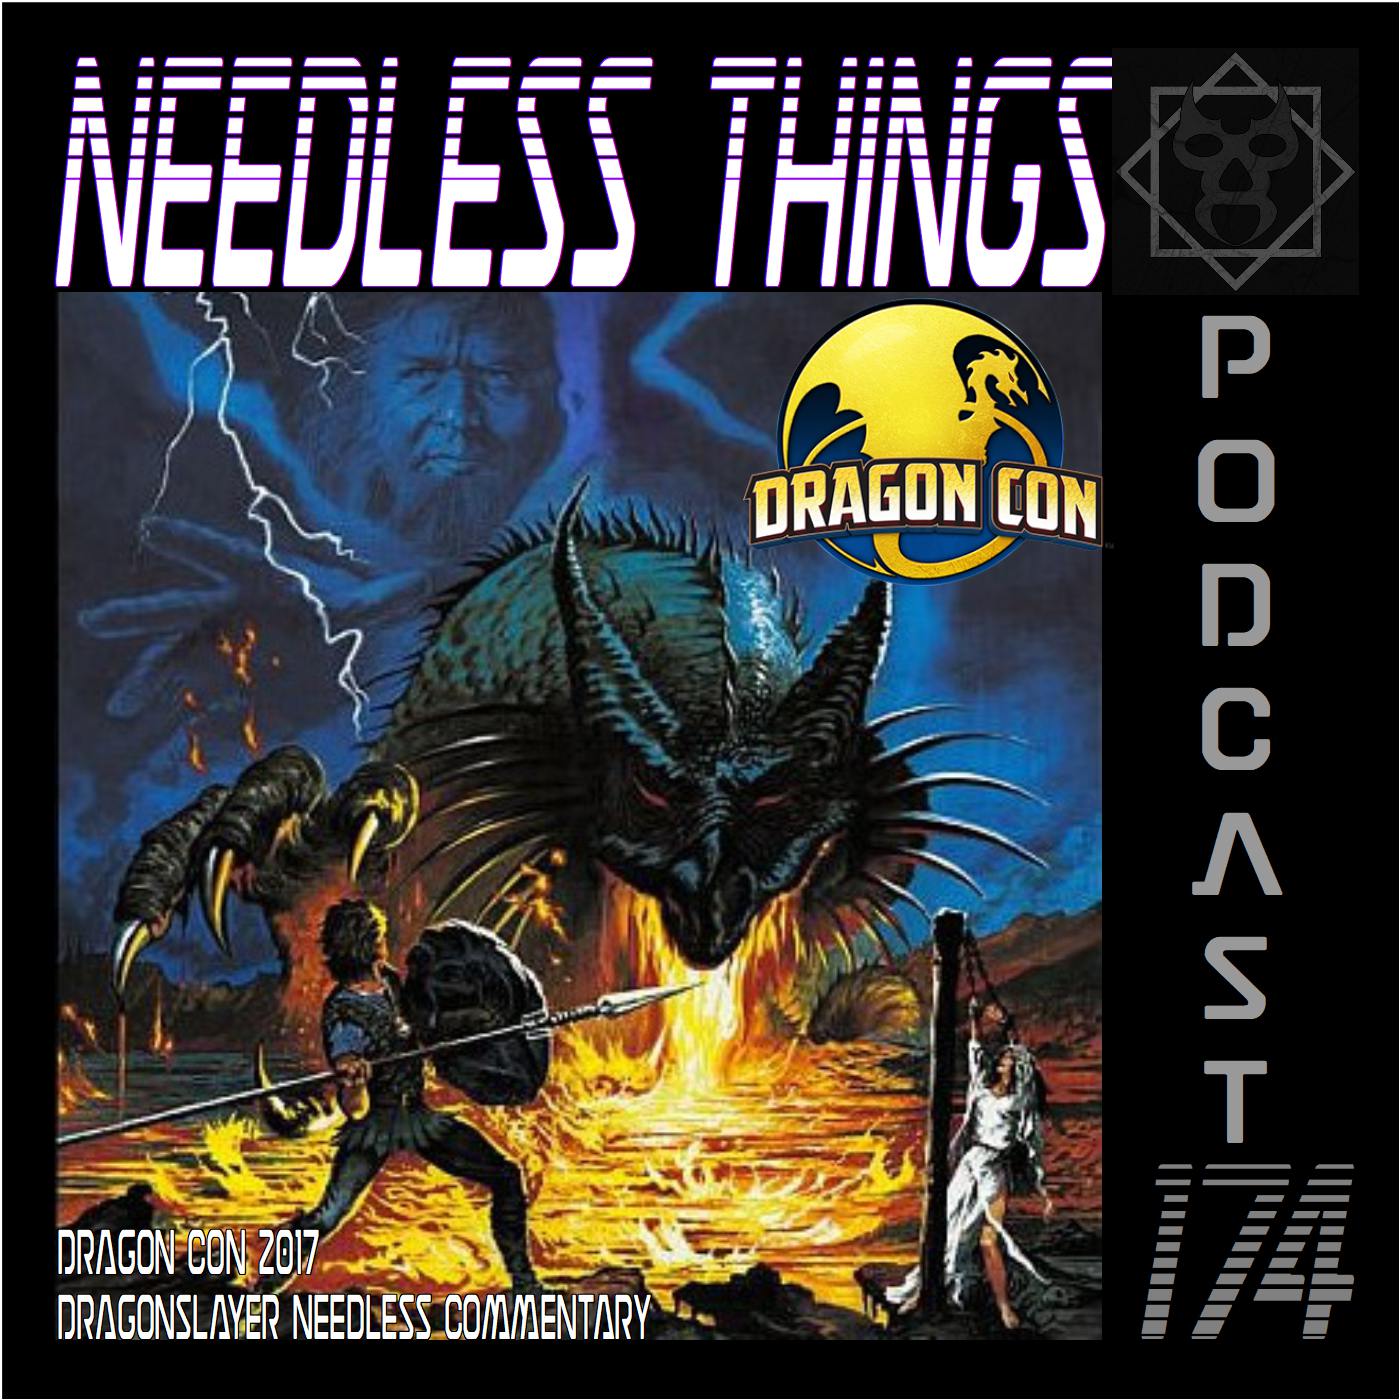 Needless Things Podcast 174 – Dragon Con 2017: Dragonslayer Needless Commentary